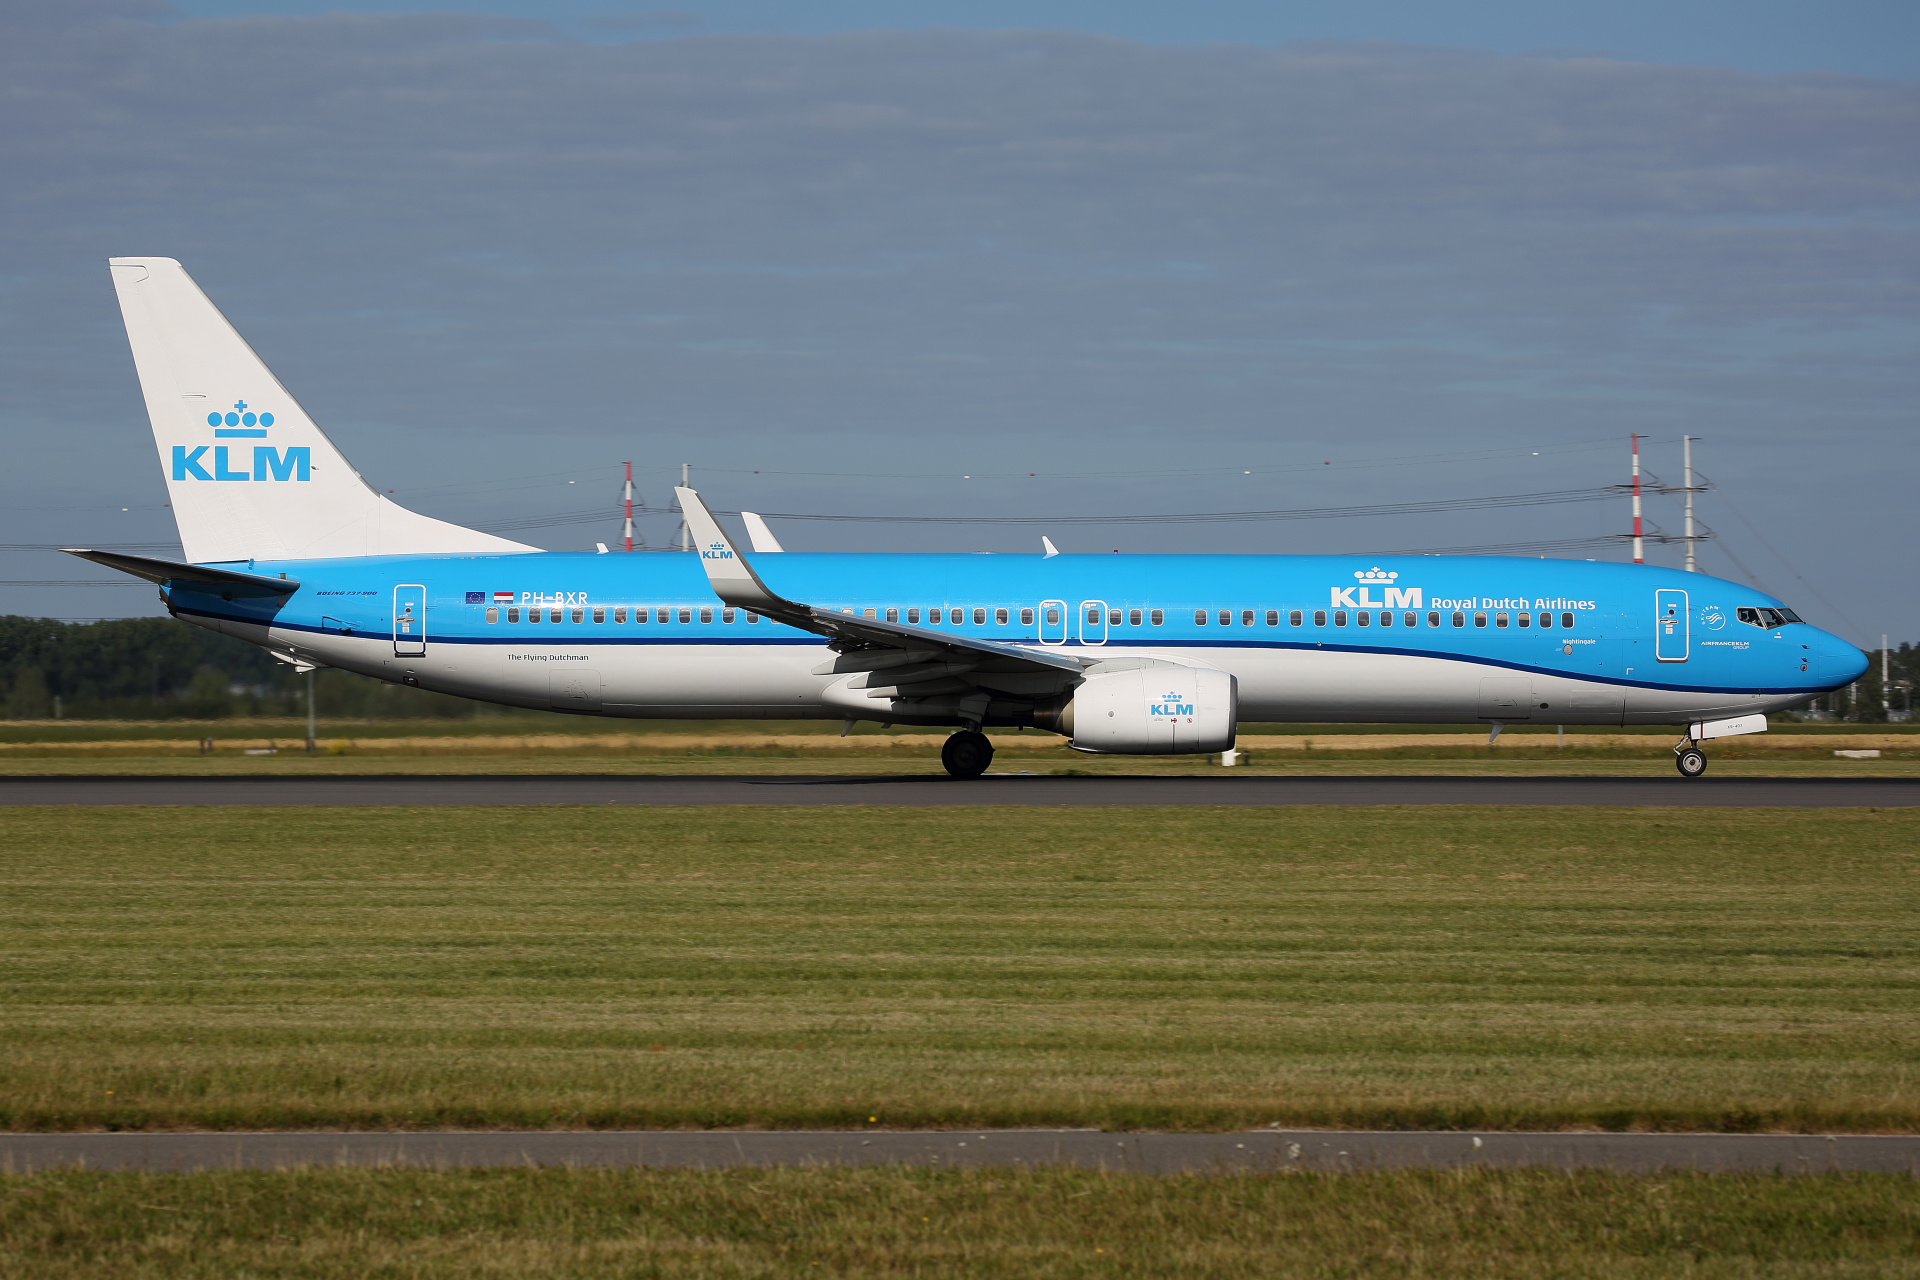 PH-BXR (new livery) (Aircraft » Schiphol Spotting » Boeing 737-900 » KLM Royal Dutch Airlines)